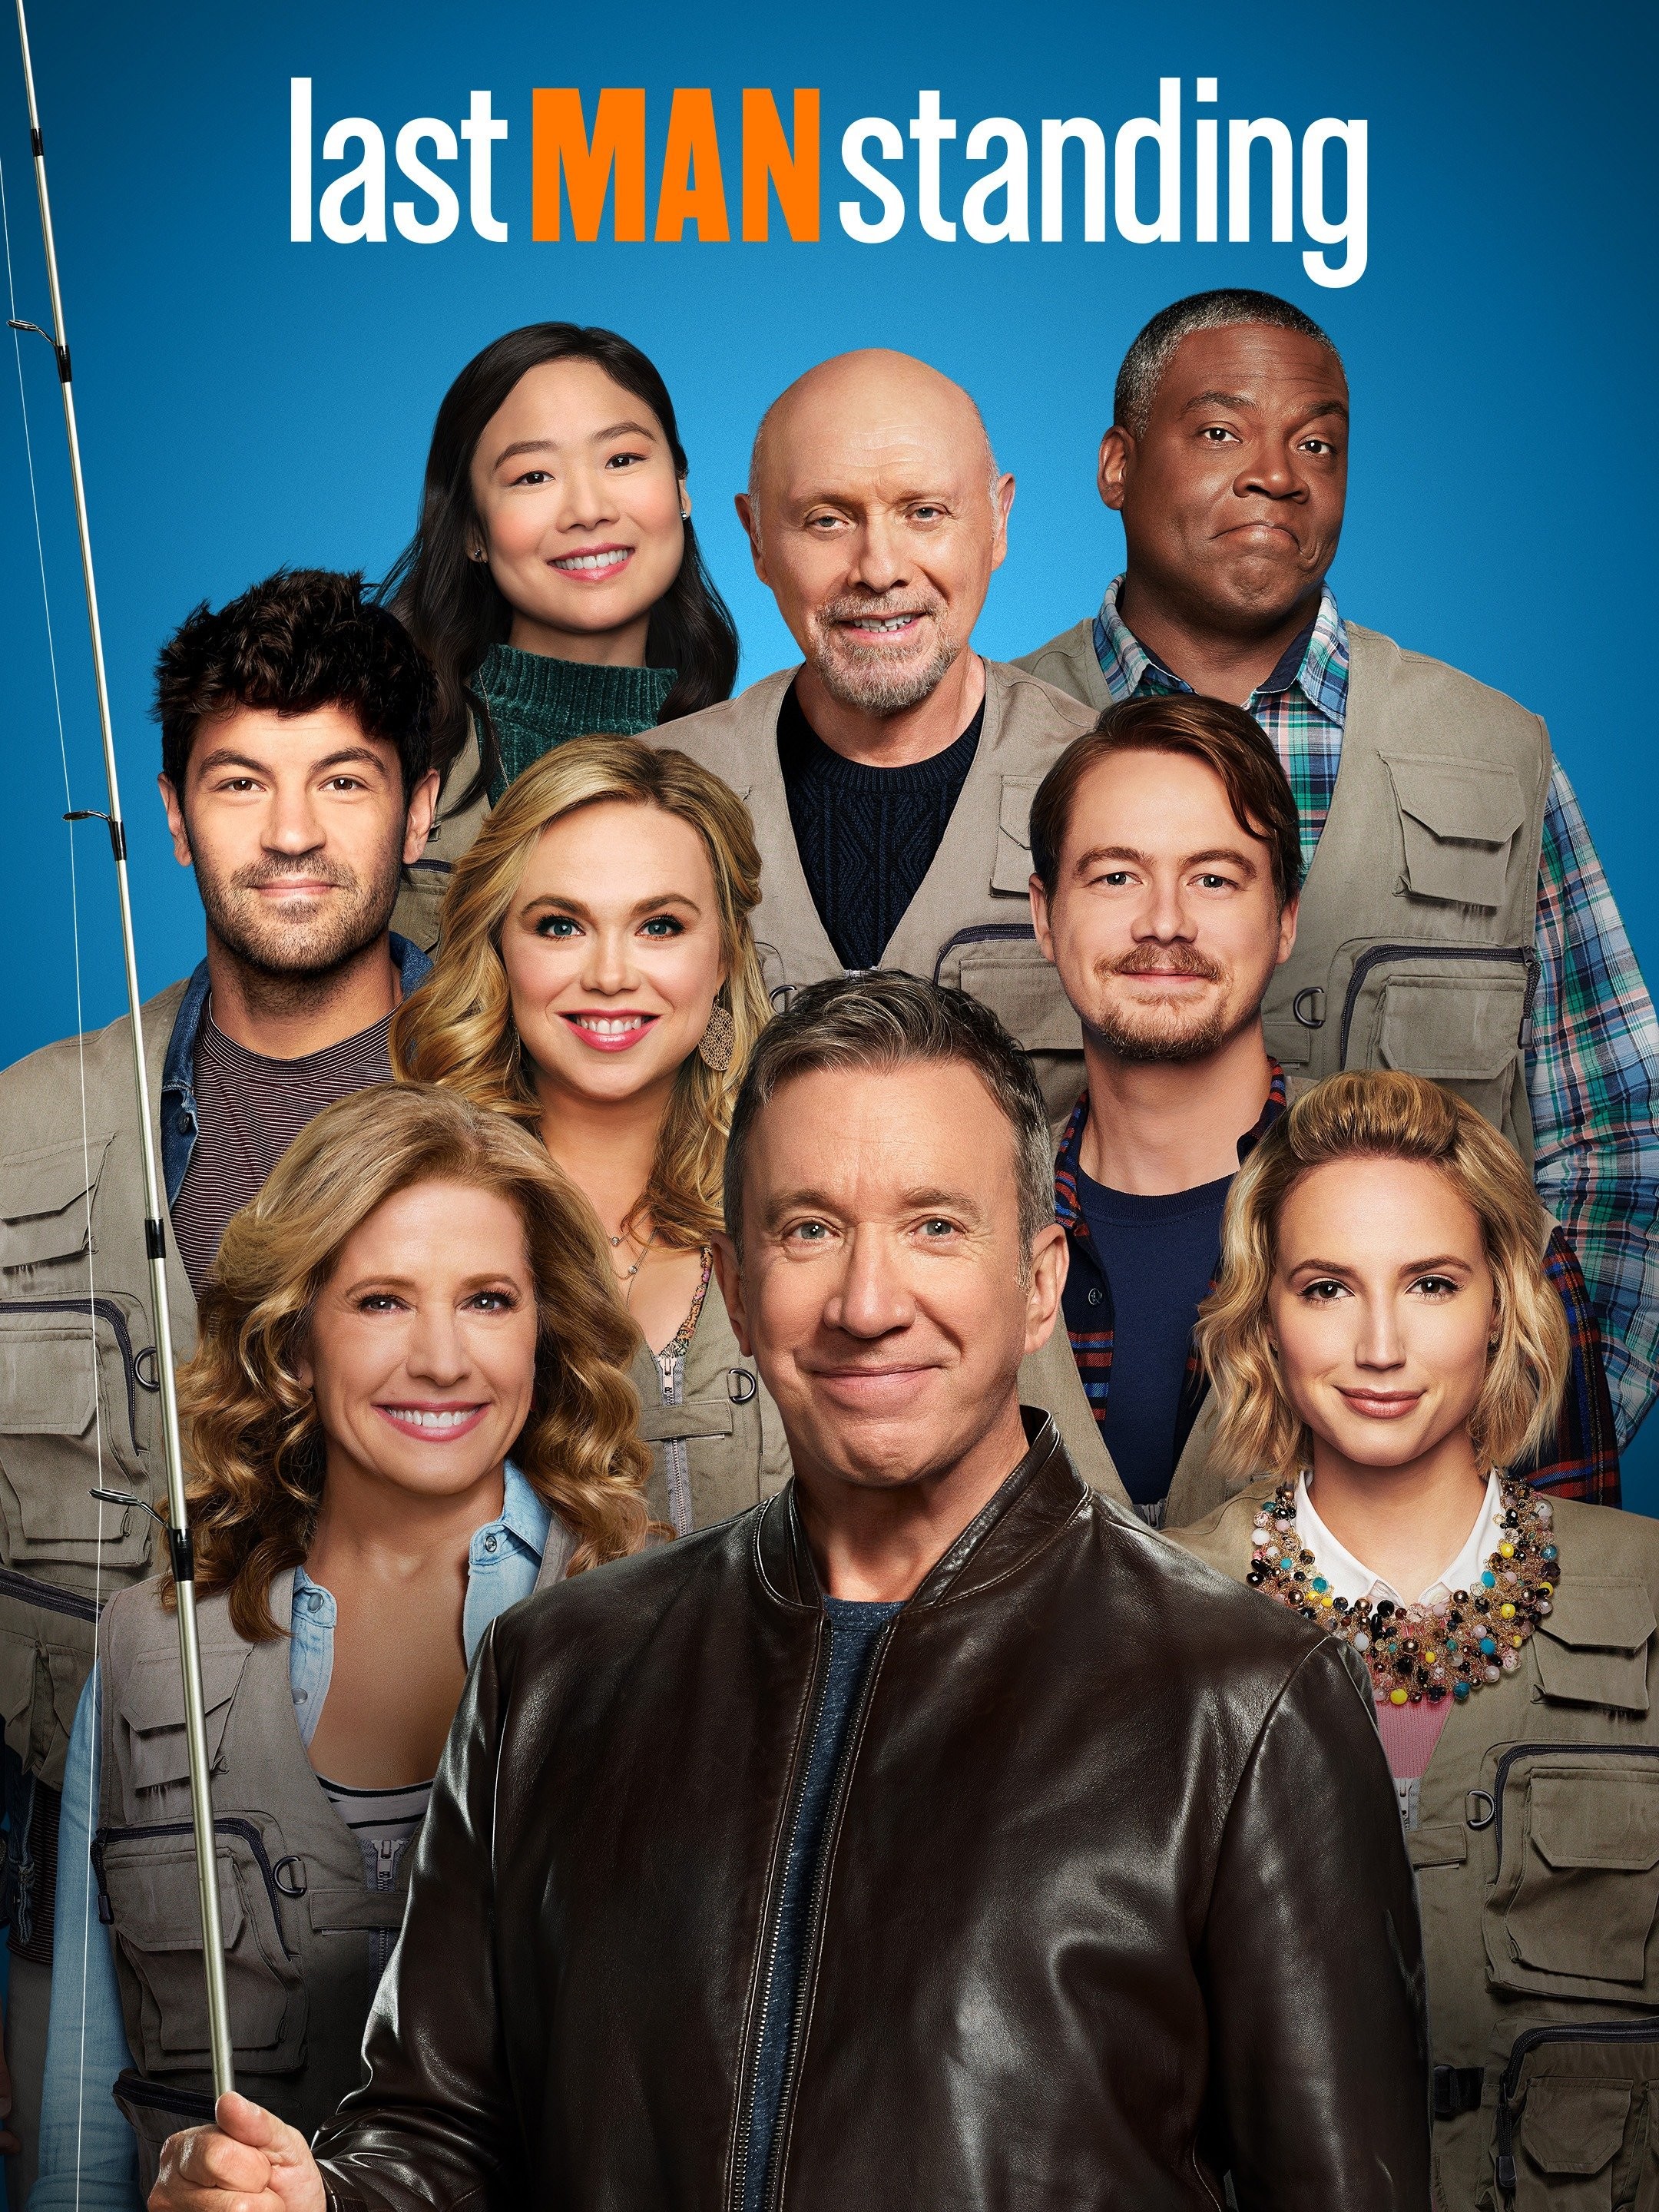 Watch Last Man Standing The Office S8 E5 | TV Shows | DIRECTV